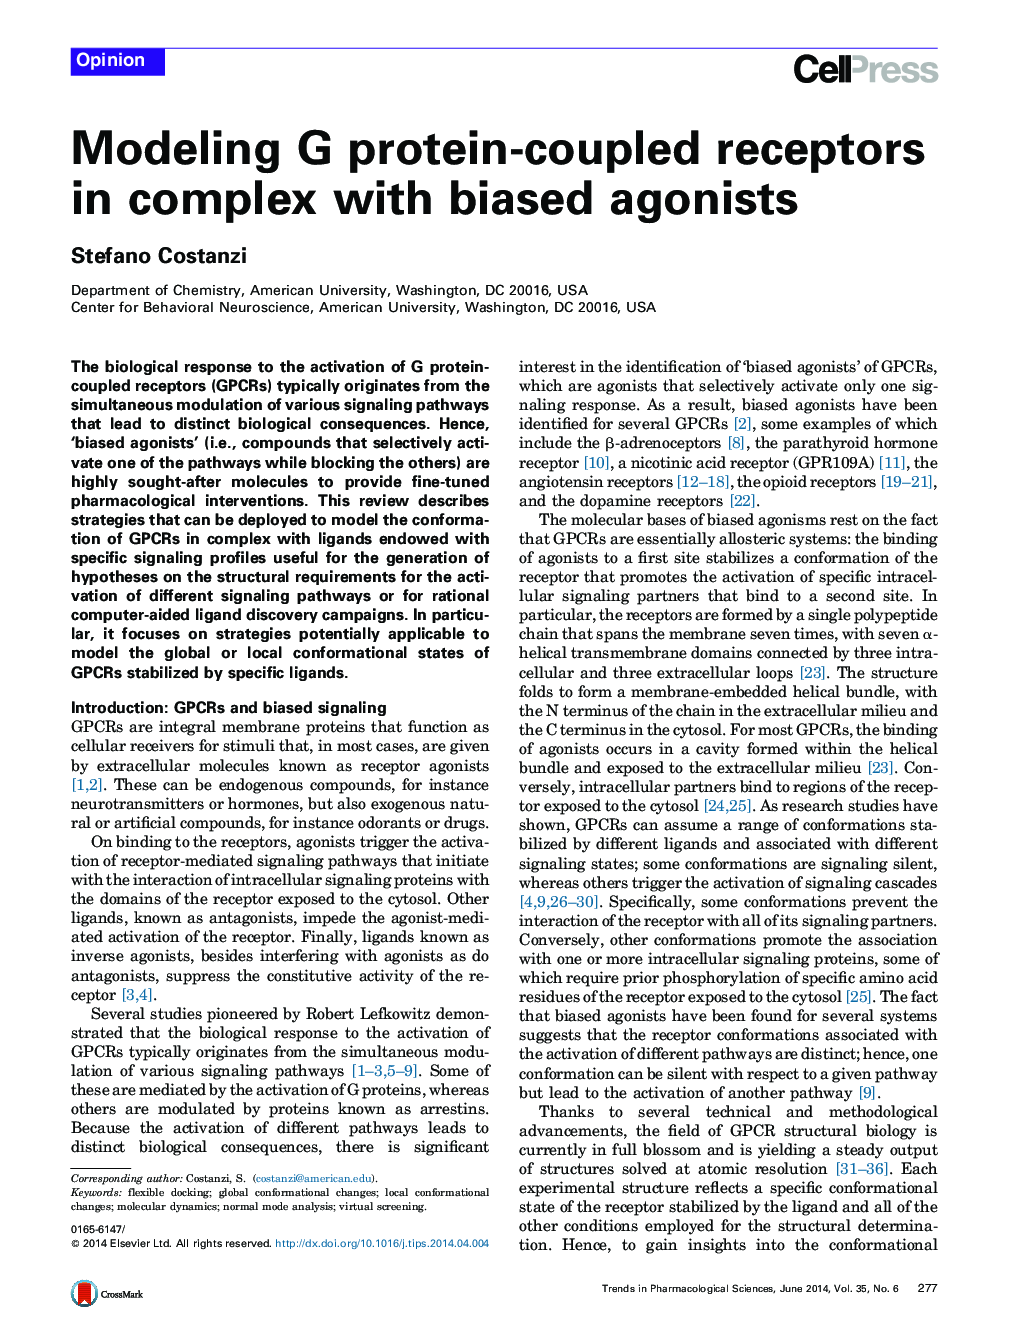 Modeling G protein-coupled receptors in complex with biased agonists